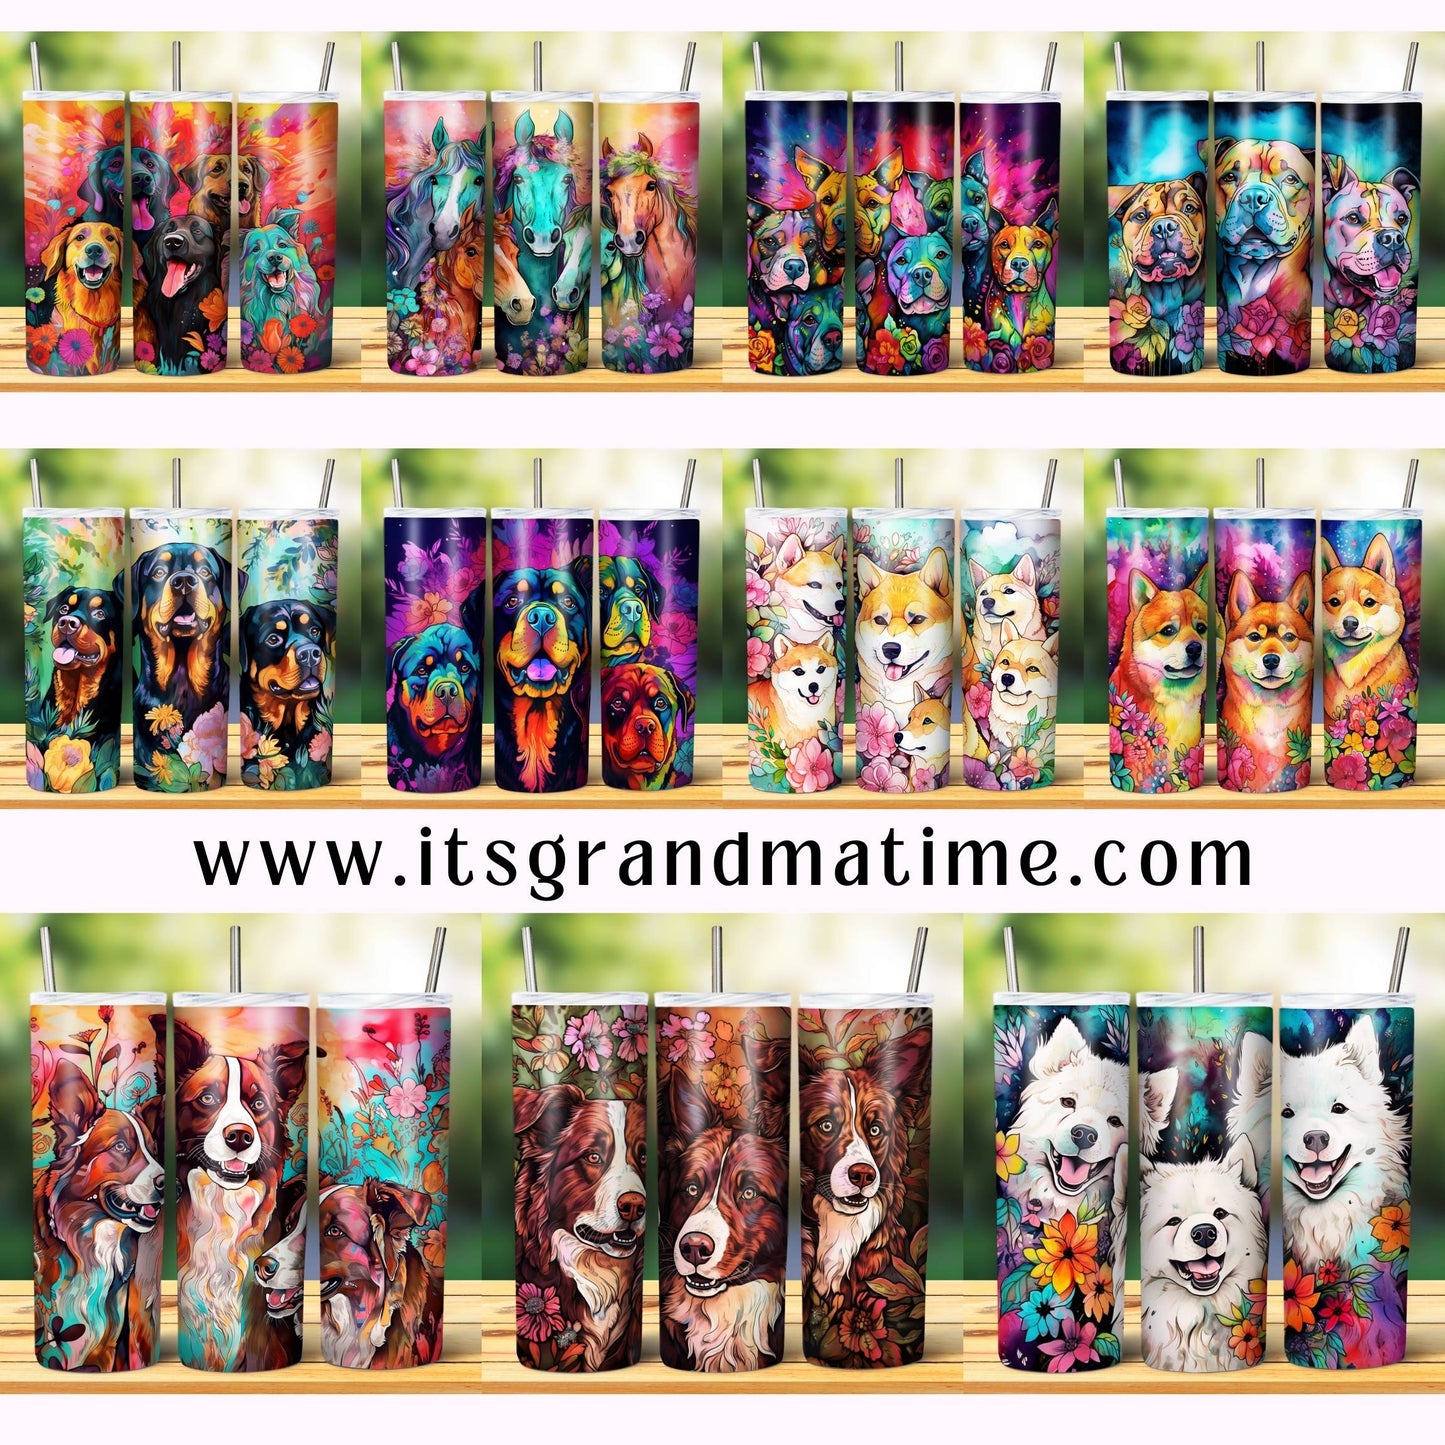 SUB1153 Animal Selfies Racoons Tumbler Sublimation Transfer